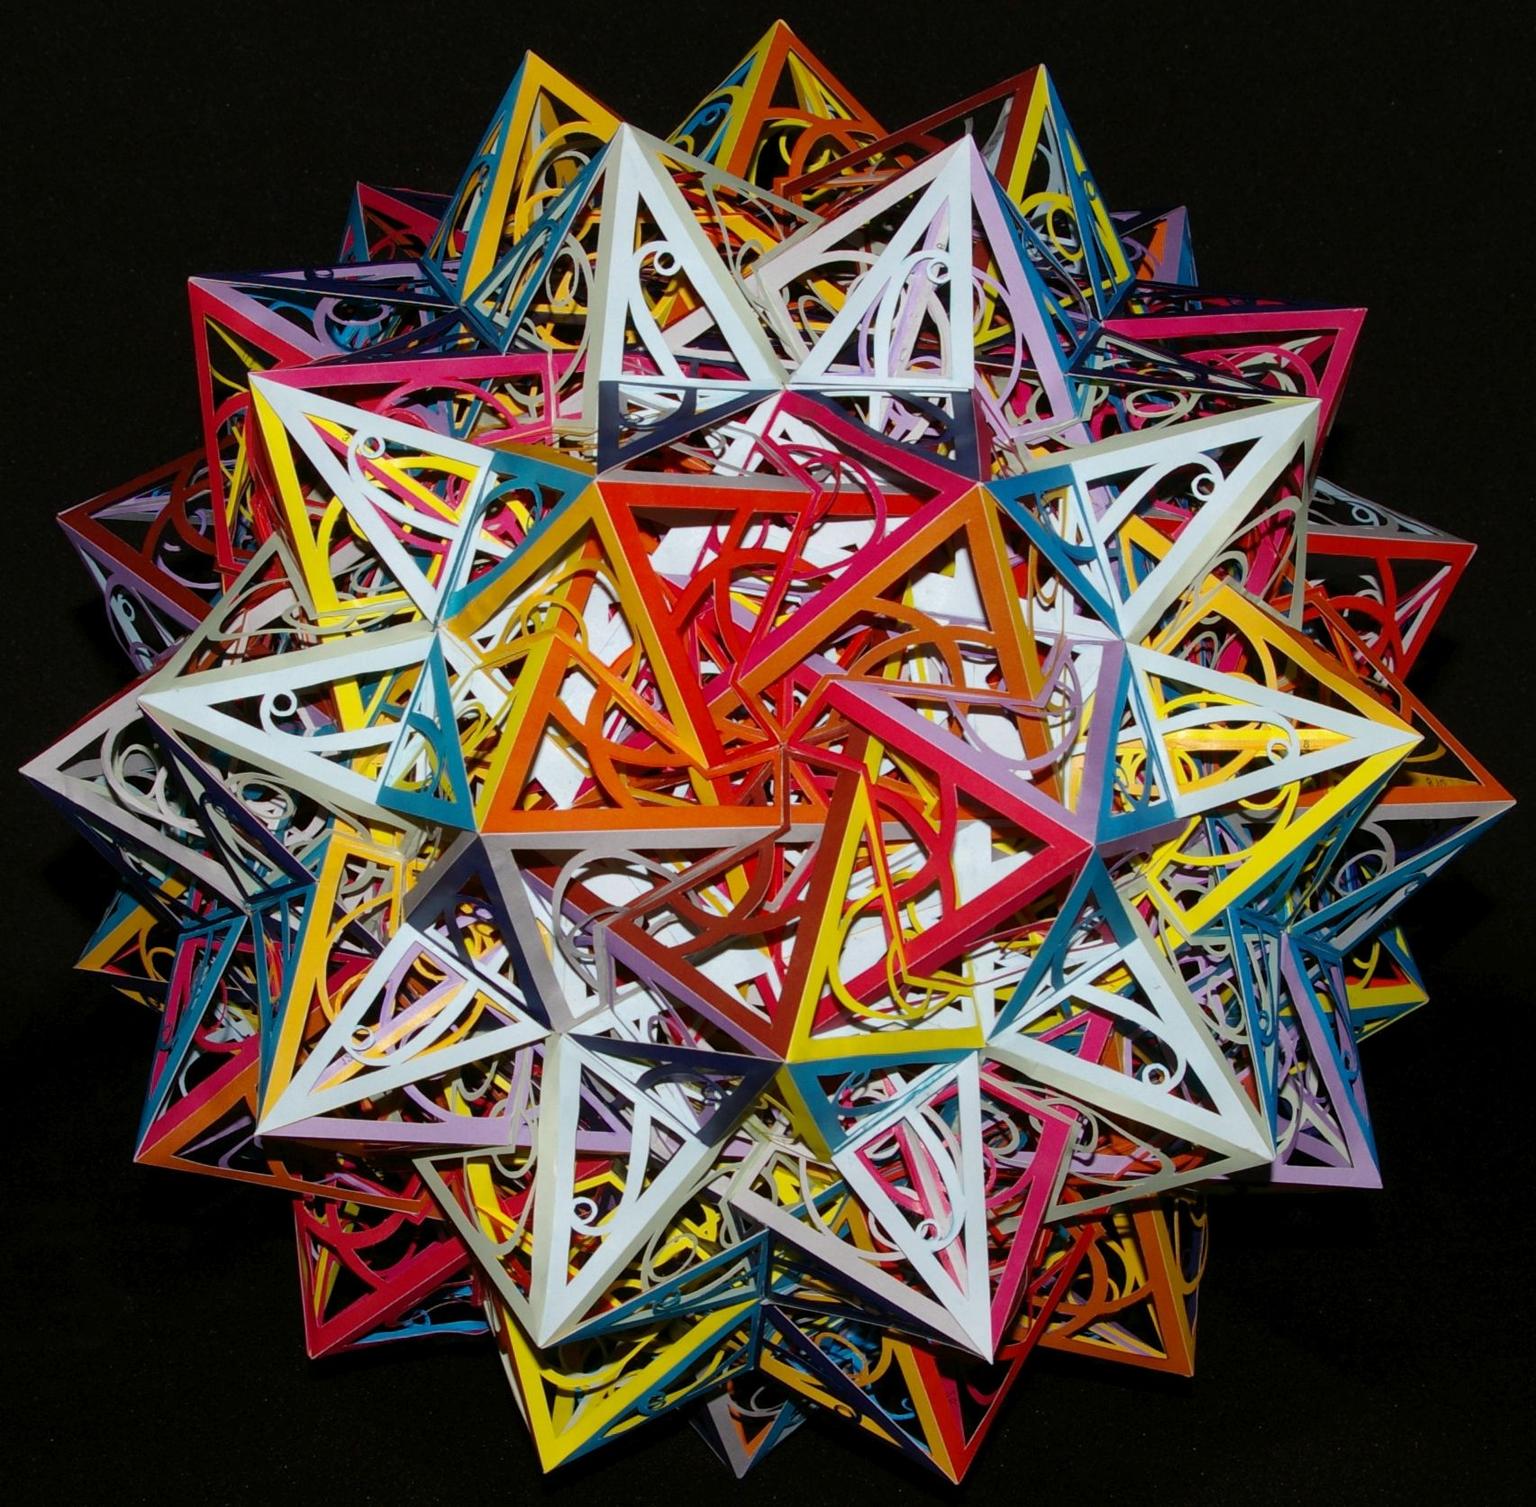 Image for entry 'Great Snub Dodecicosidodecahedron'